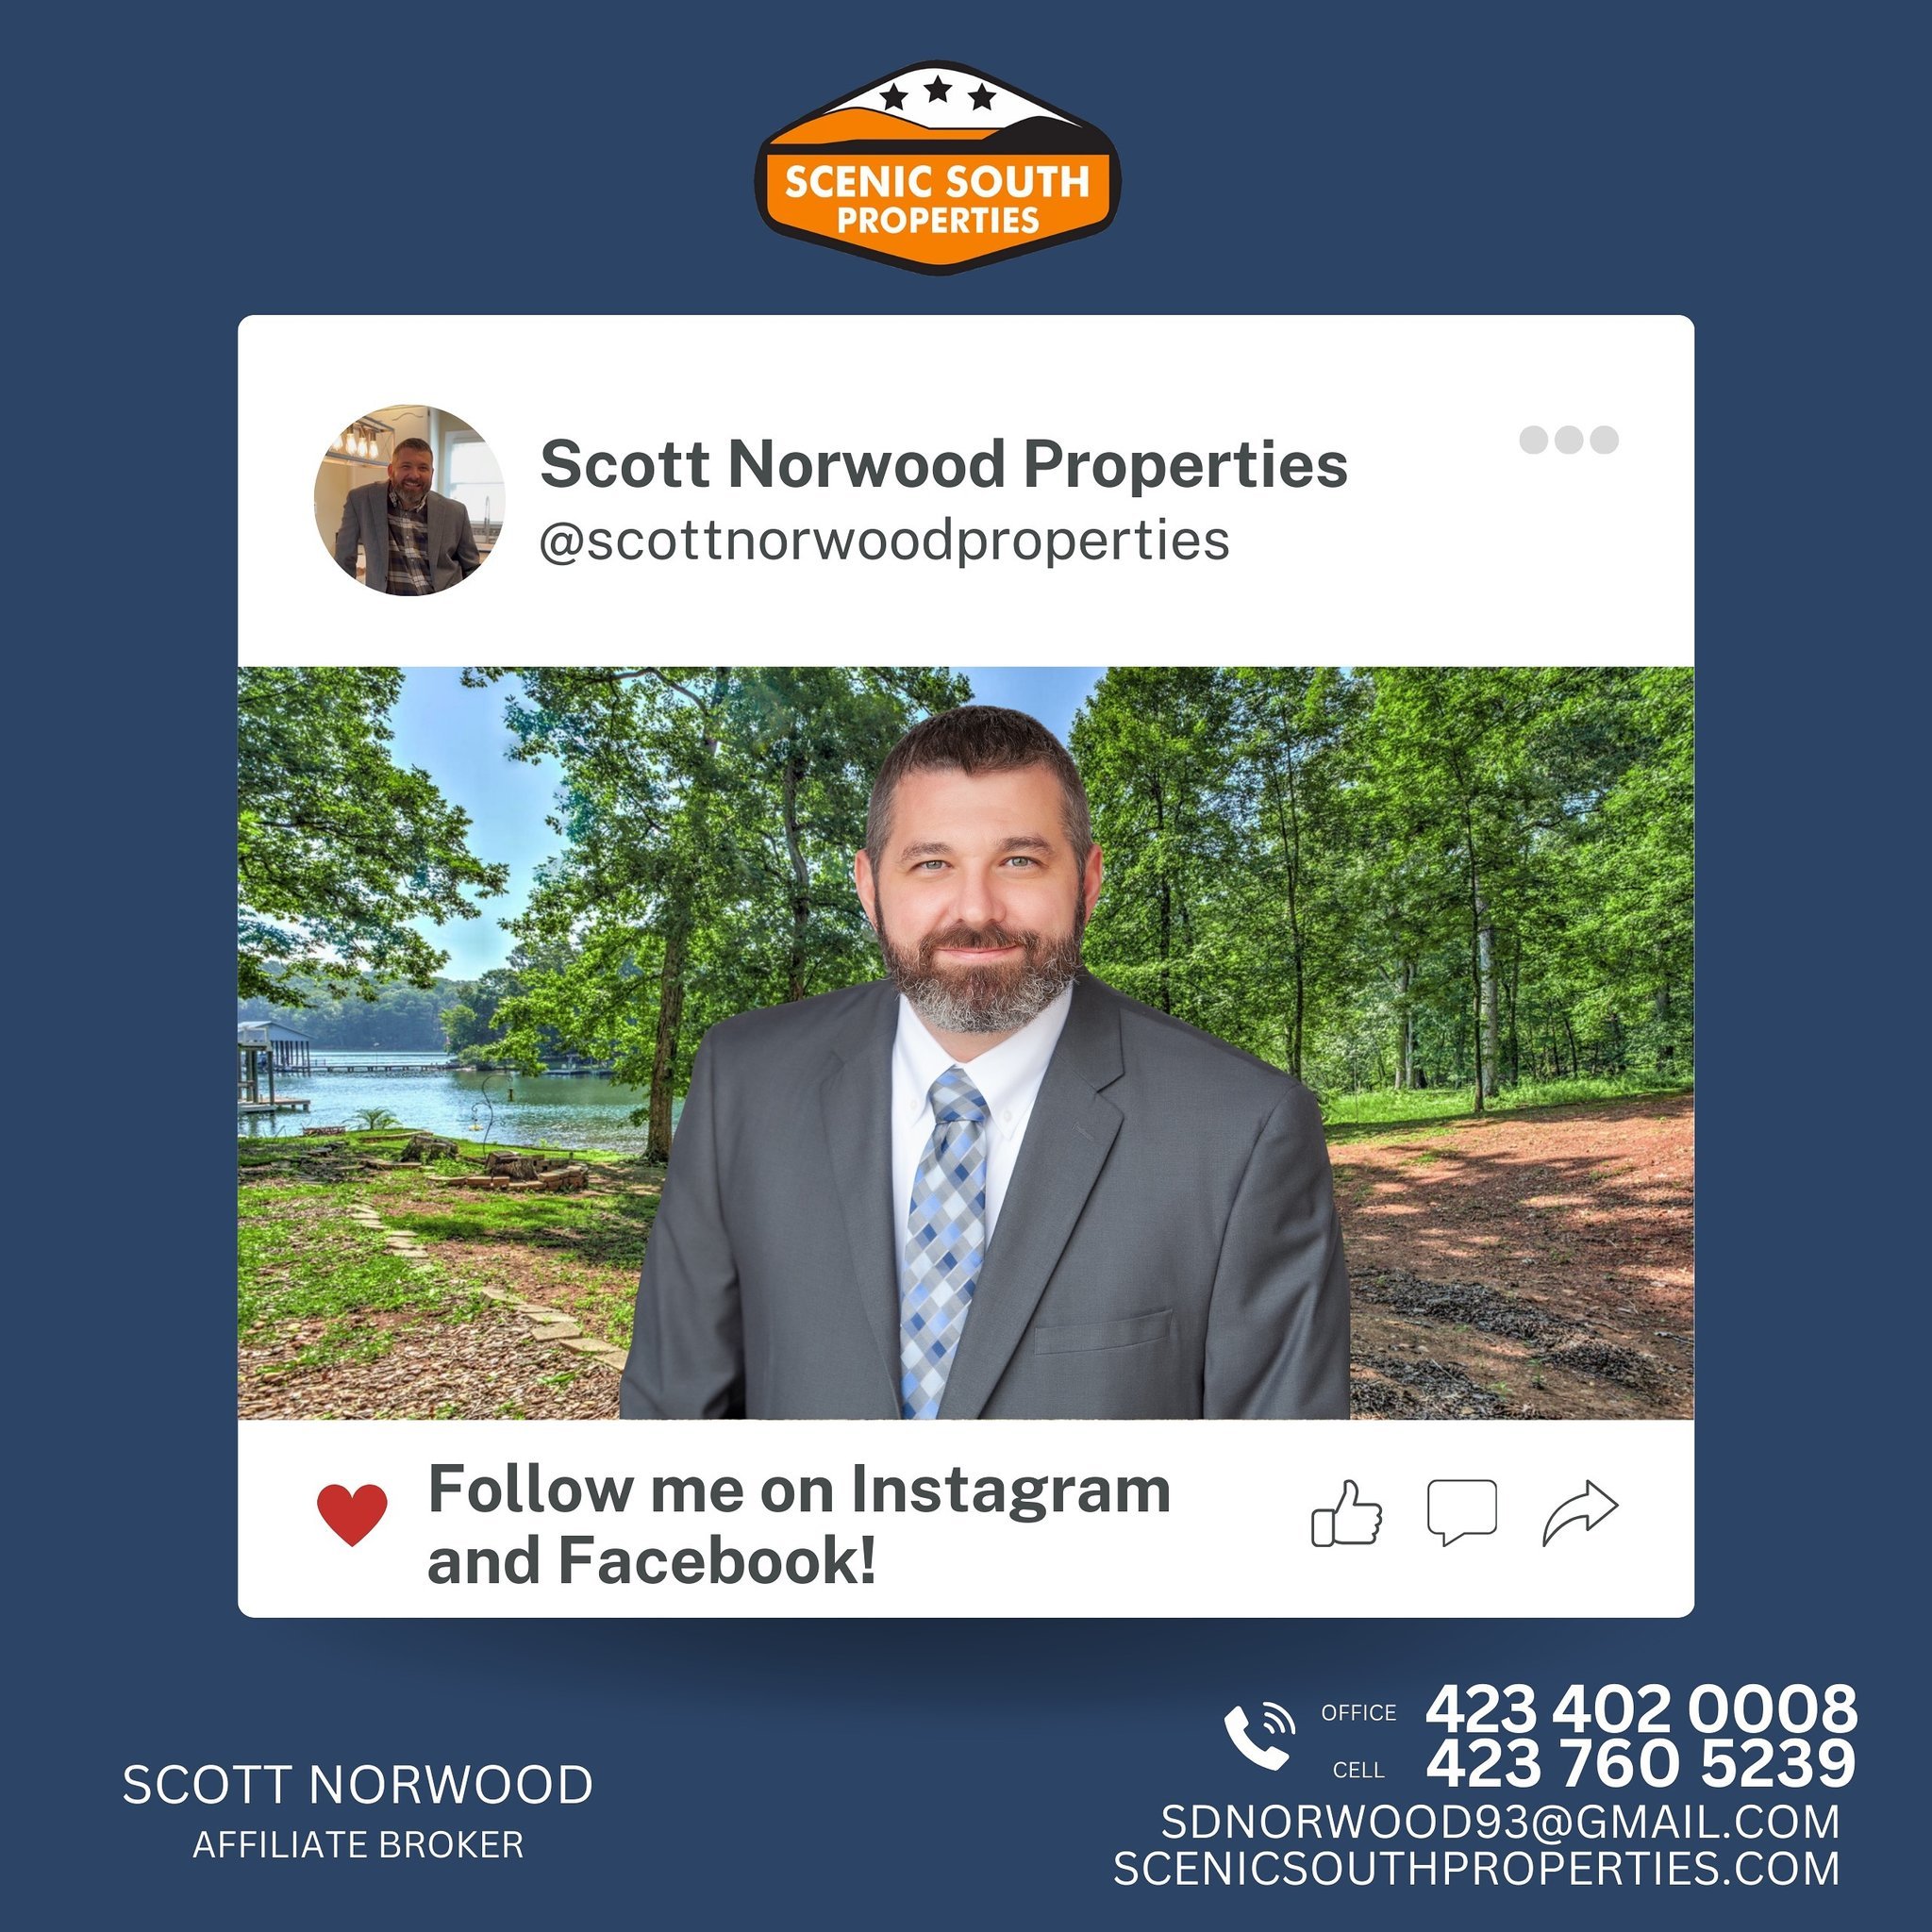 Happy Tuesday friends 👋🏼 make sure you&rsquo;re following my Instagram and Facebook page for all up to date listings! 

Send some love my way by pressing follow on both of my accounts @scottnorwoodproperties 🏡 

Stay tuned for new home and land li